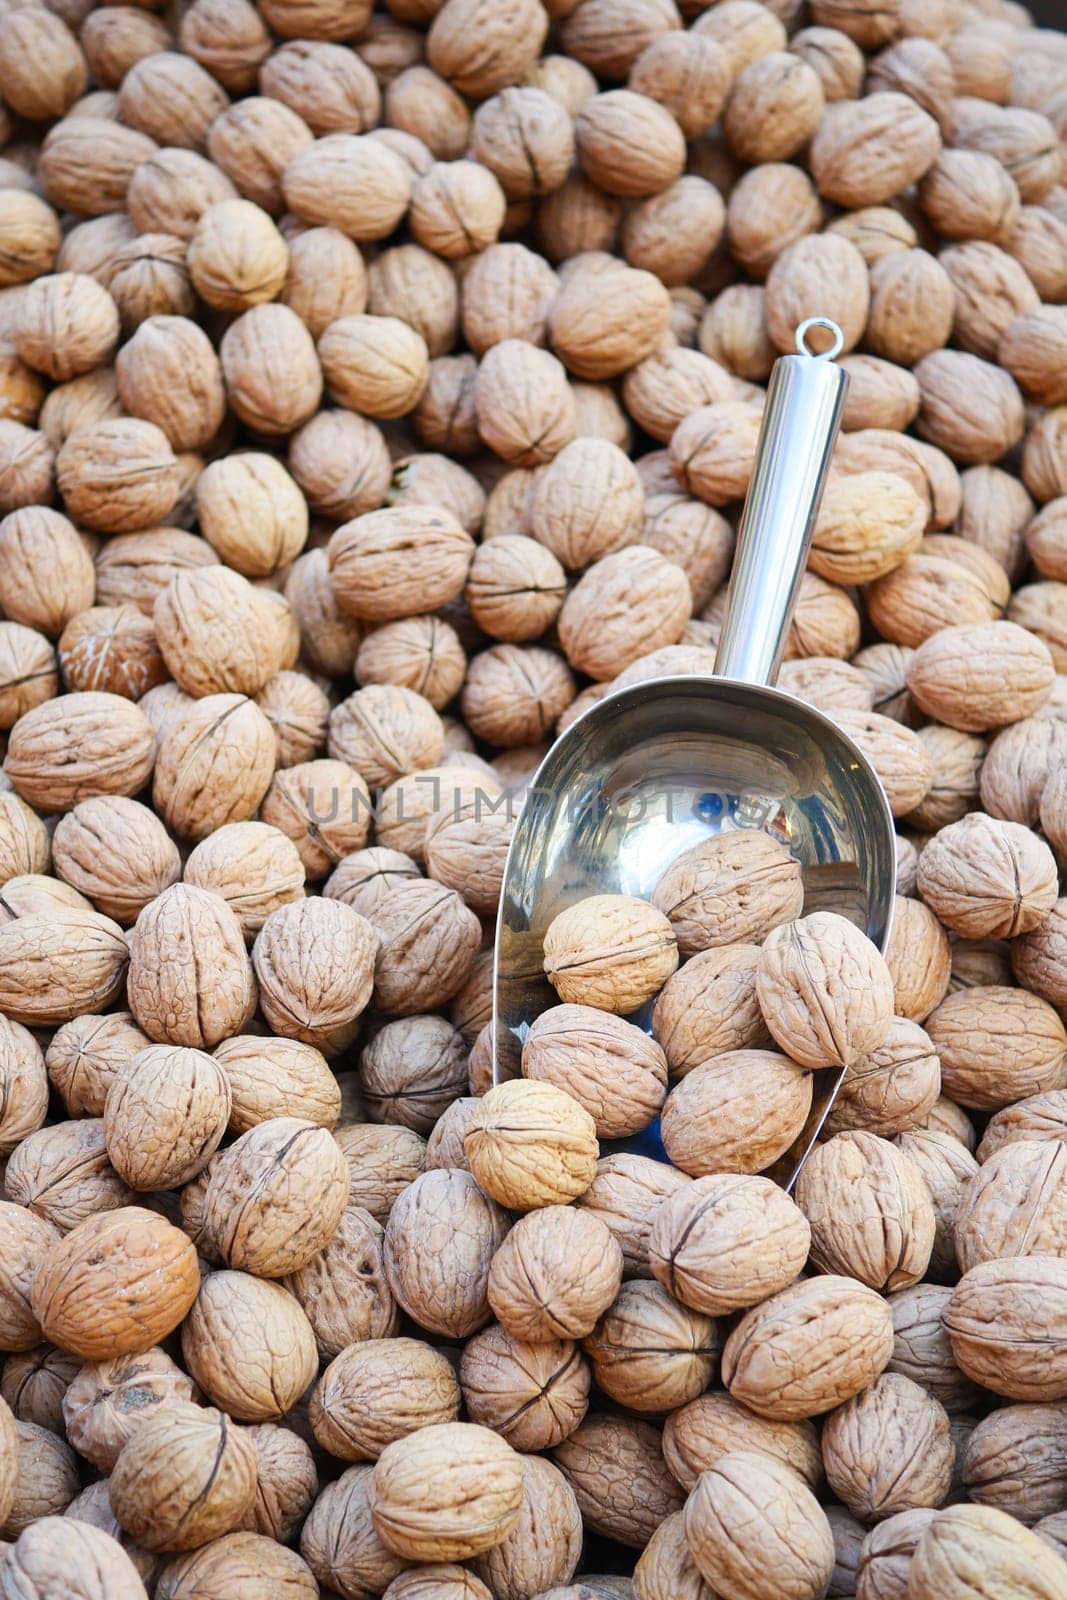 A scoop of walnuts, a superfood, rests on a stack of nuts seeds.